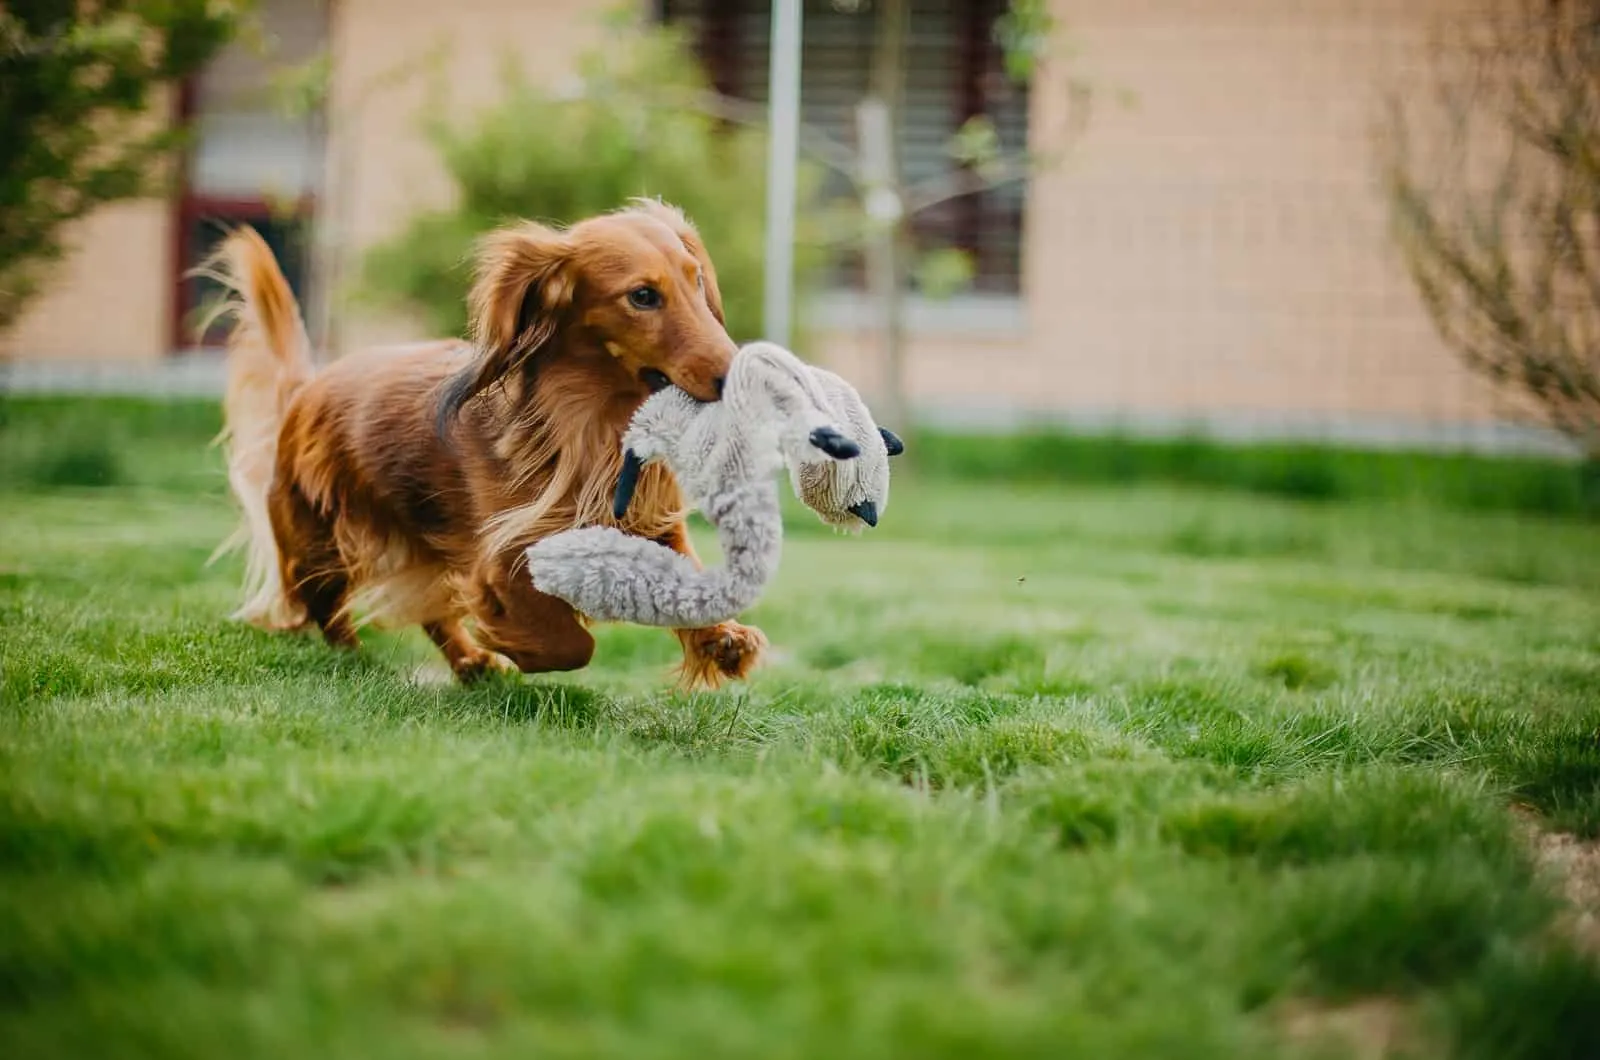 Our Top Toy Picks: 3 Best Toys for Dachshunds — Tug-E-Nuff